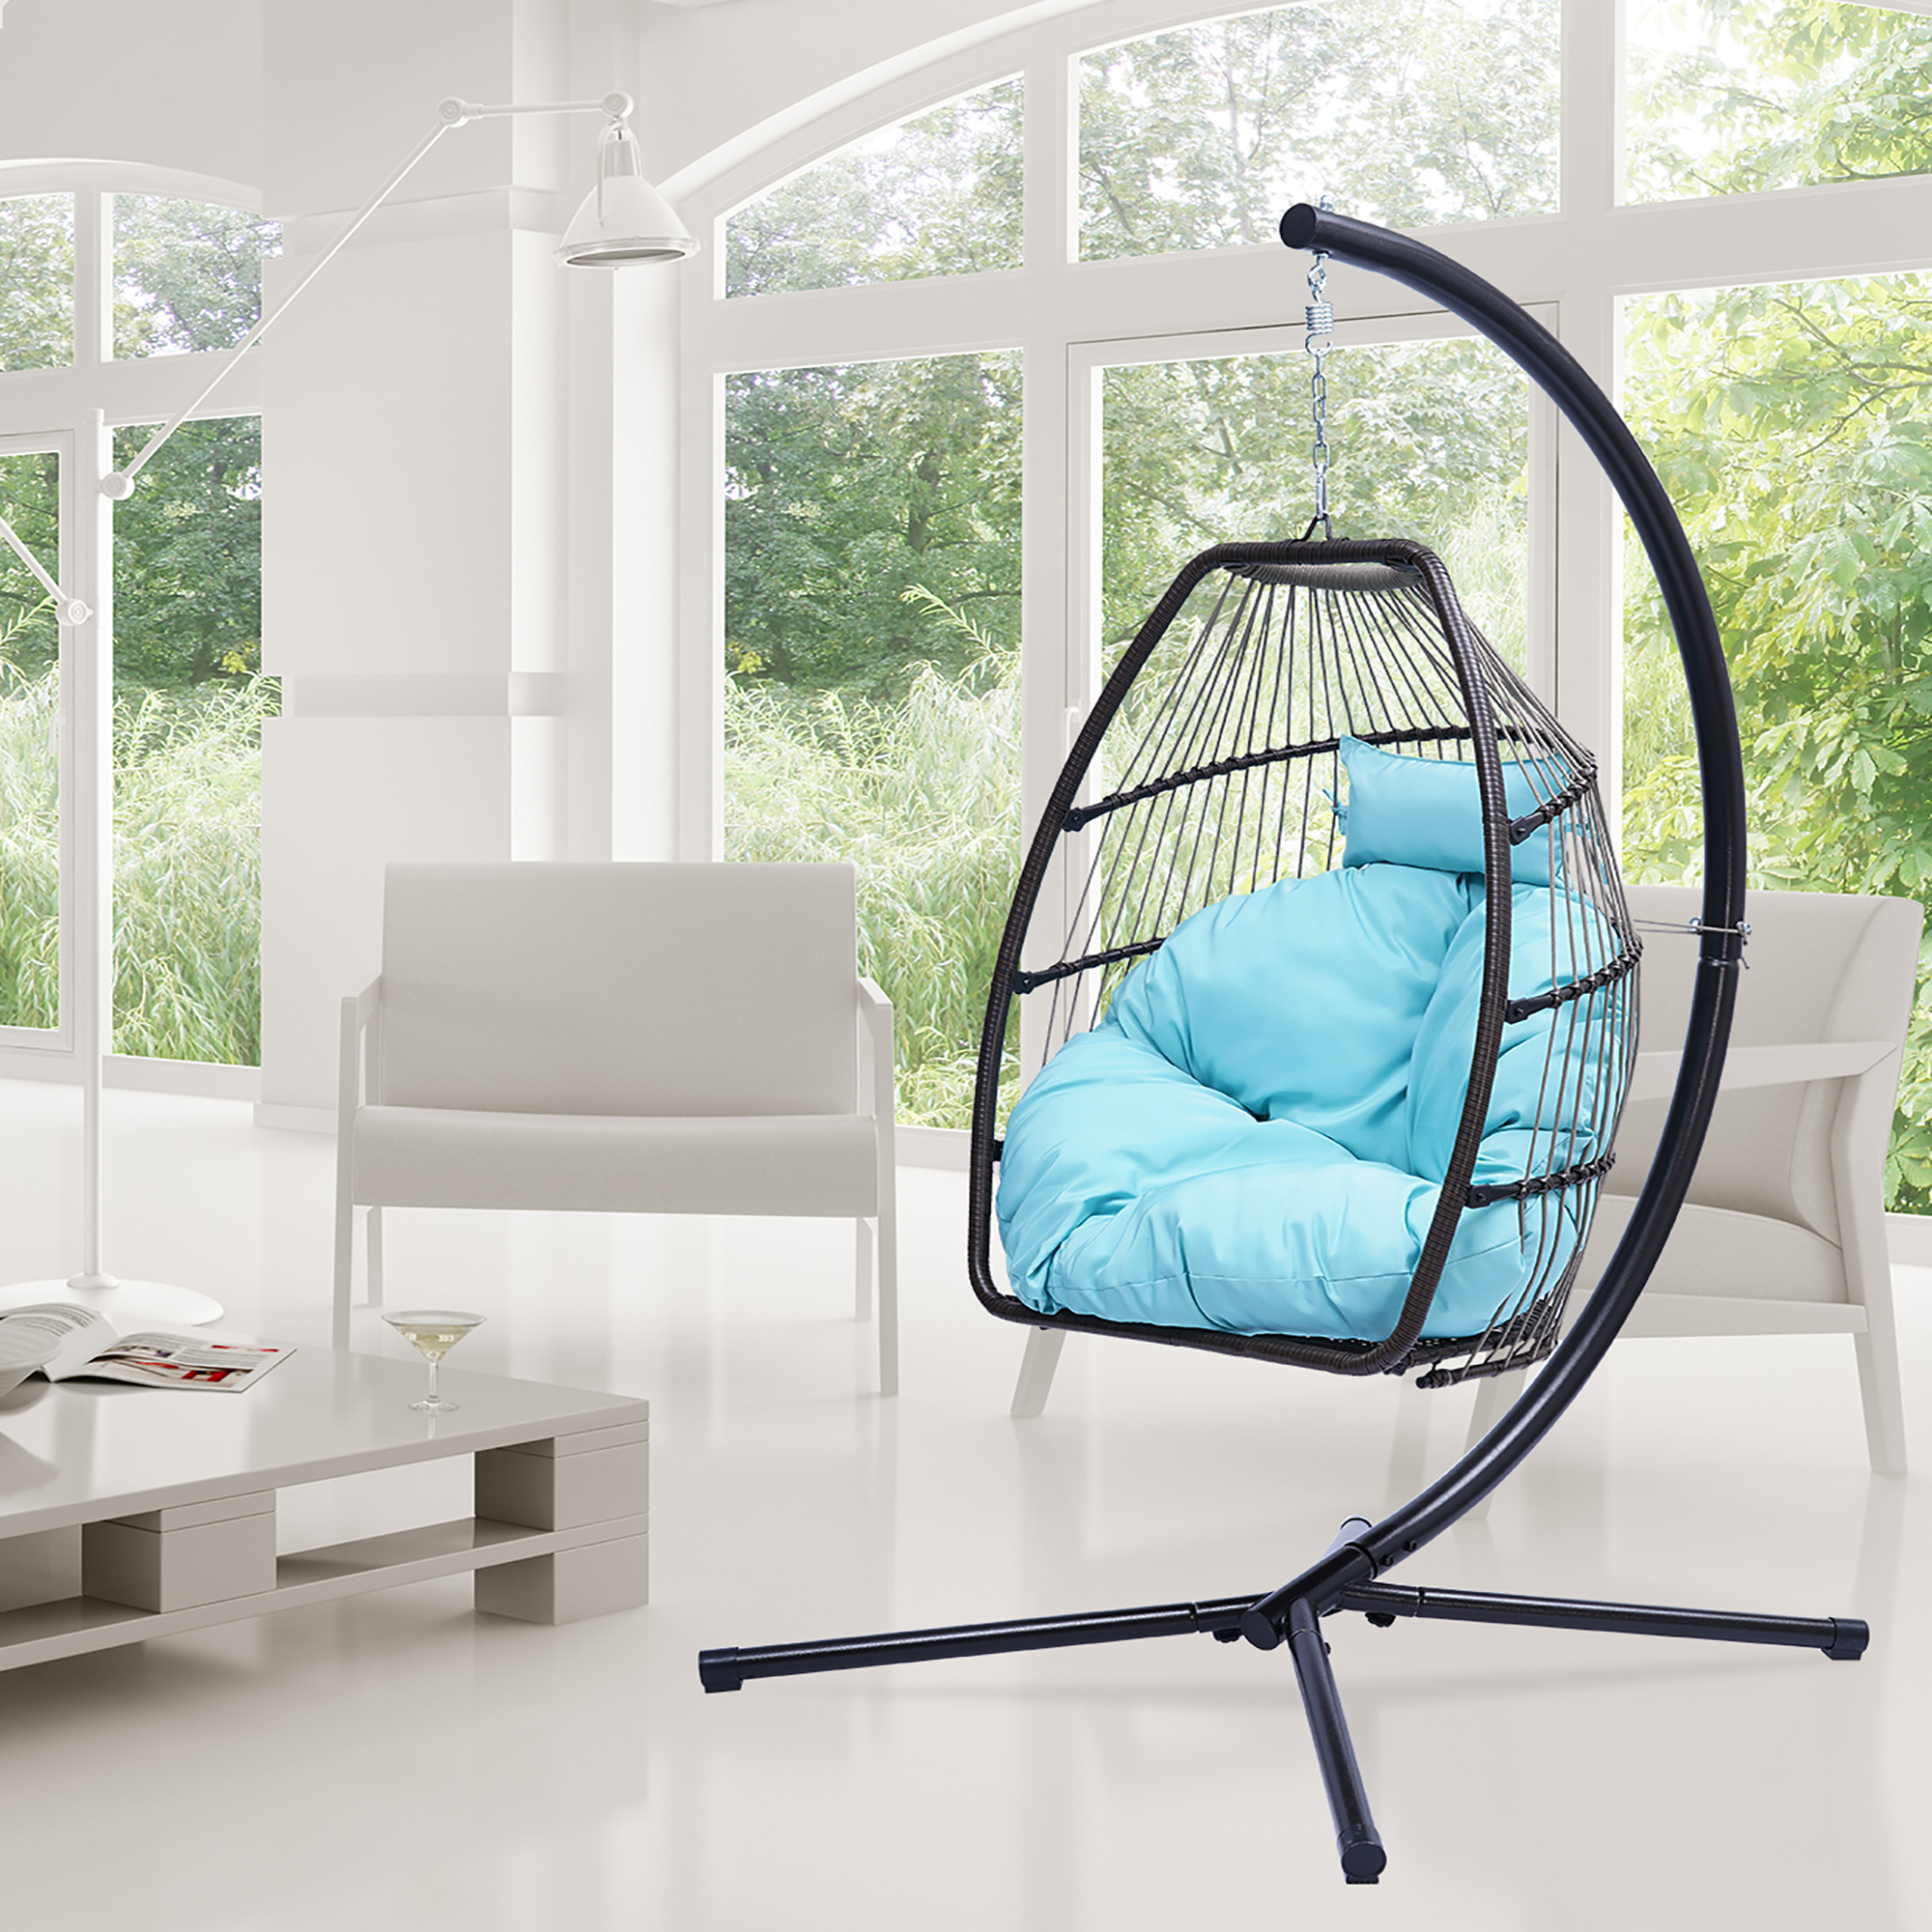 UHOMEPRO Wicker Hanging Egg Chair, Outdoor Patio Furniture with Light Gray Cushion, Hanging Egg Chair with Stand, Swinging Egg Chair, Outdoor Chair for Beach, Backyard, Pool, Balcony, Lawn, W11051 - image 2 of 6